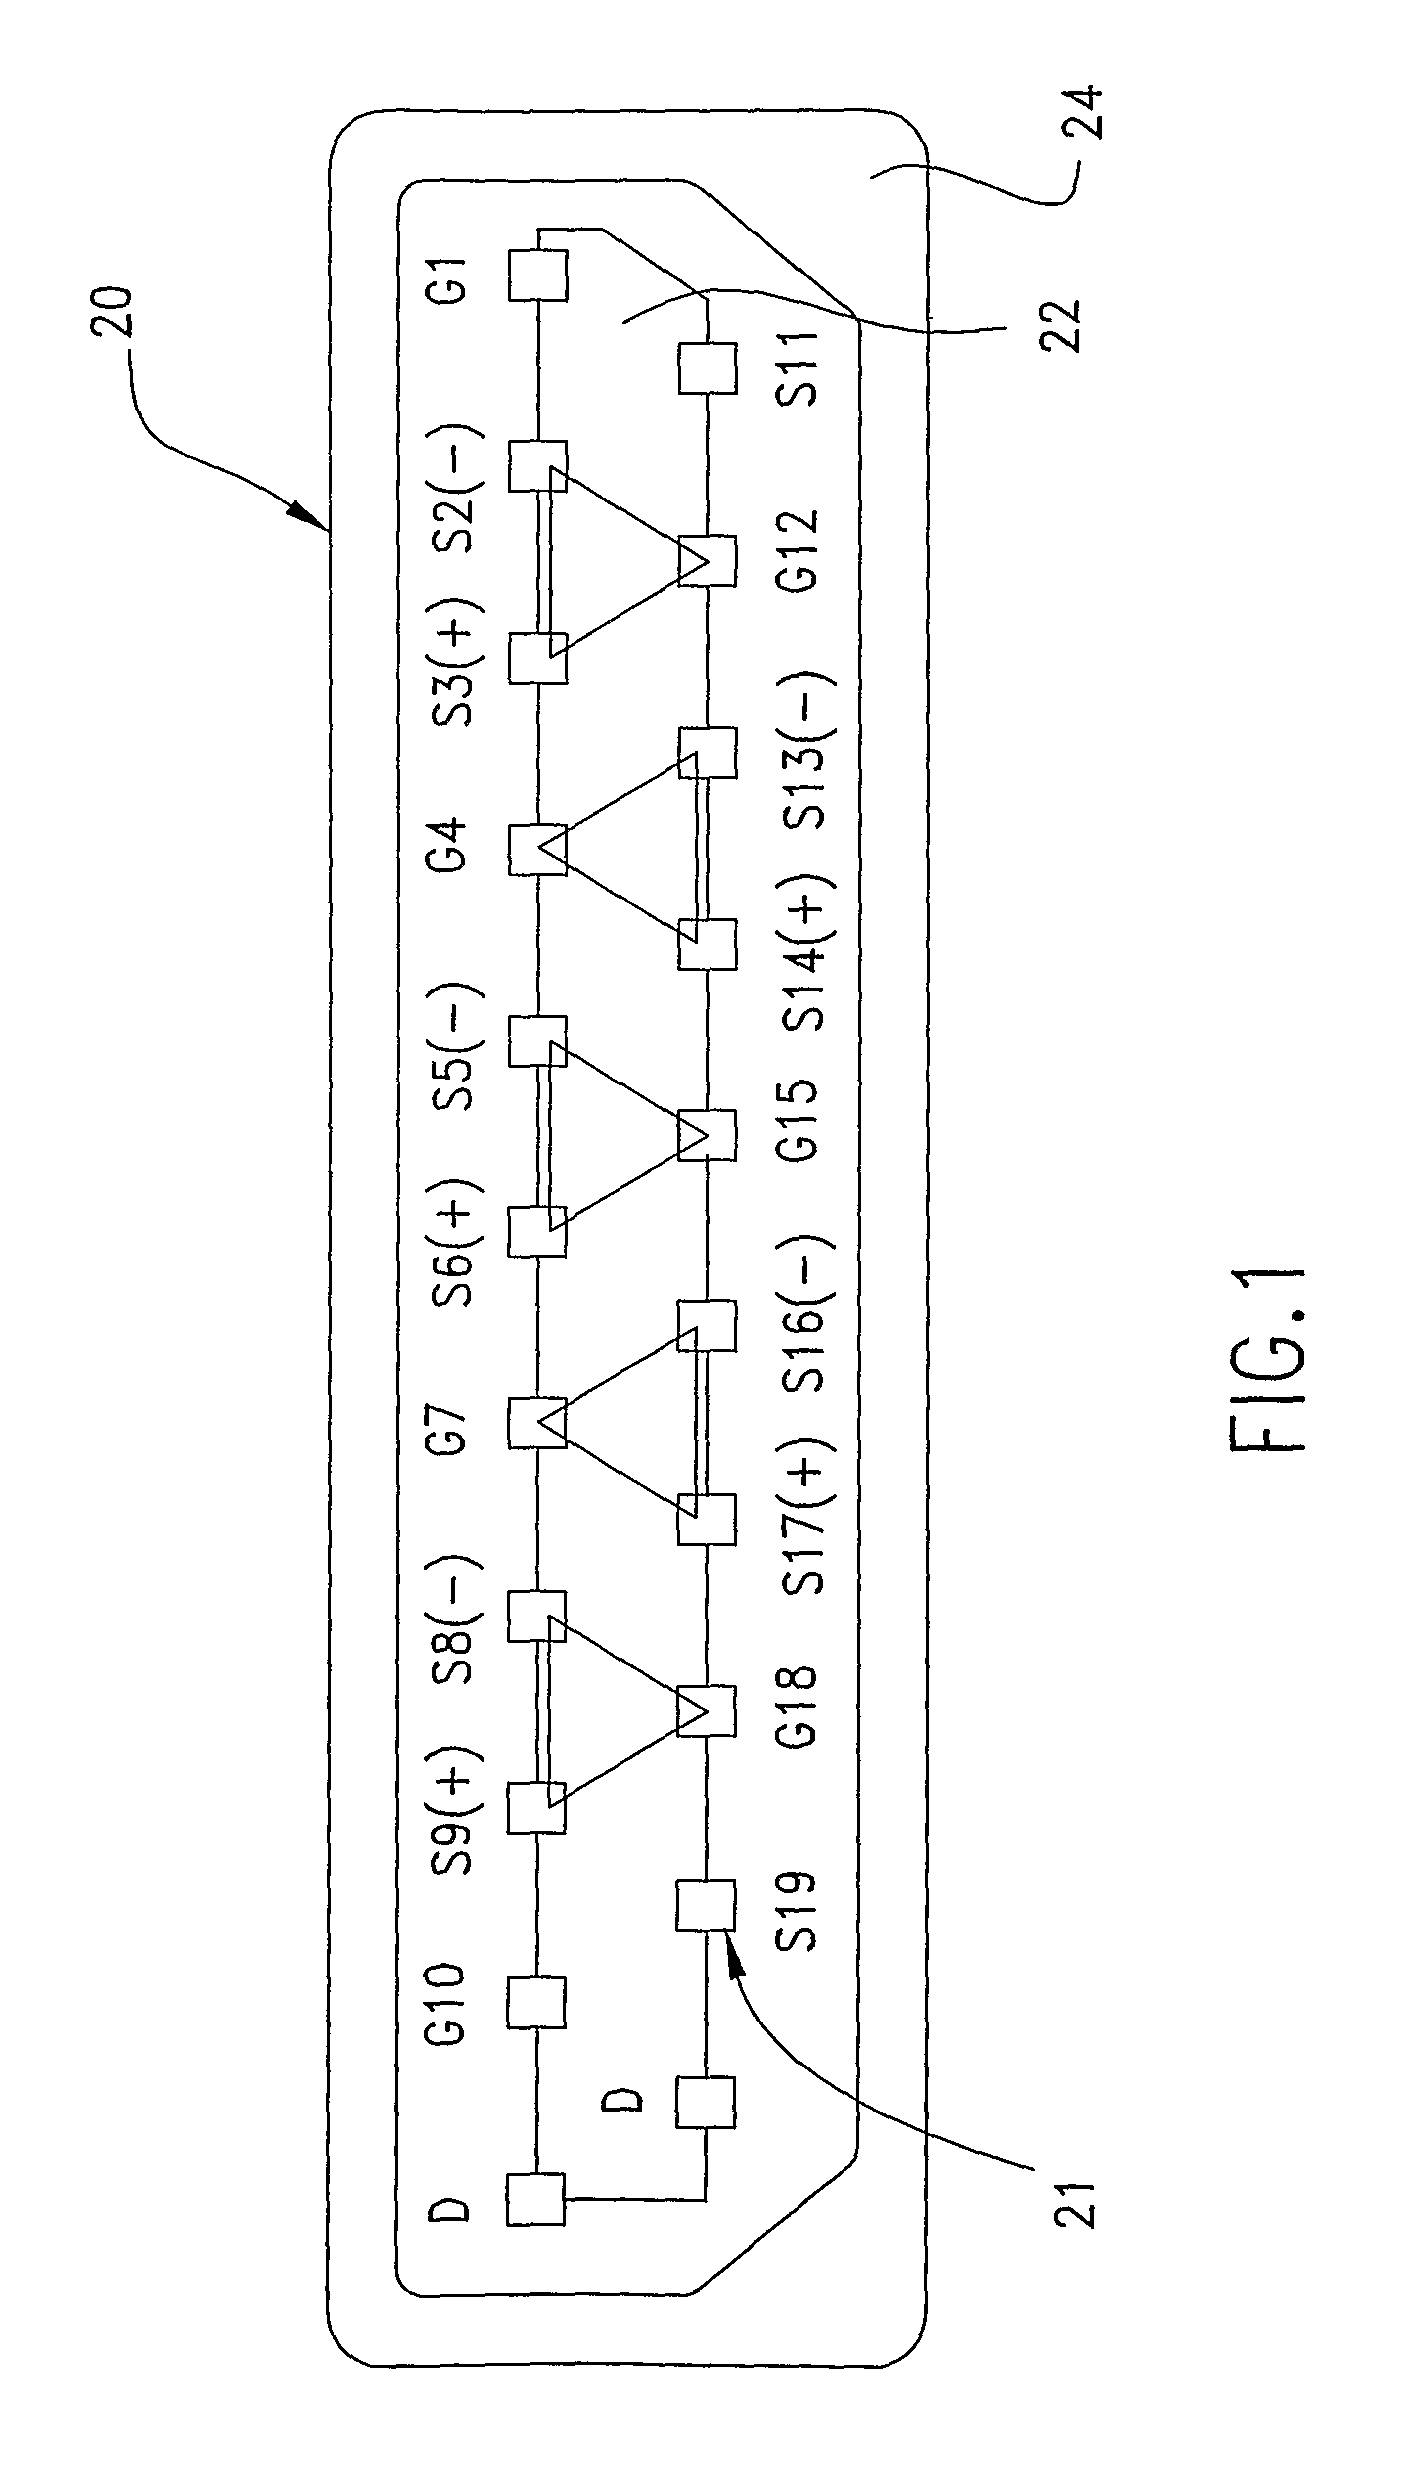 Impedance controlled electrical connector